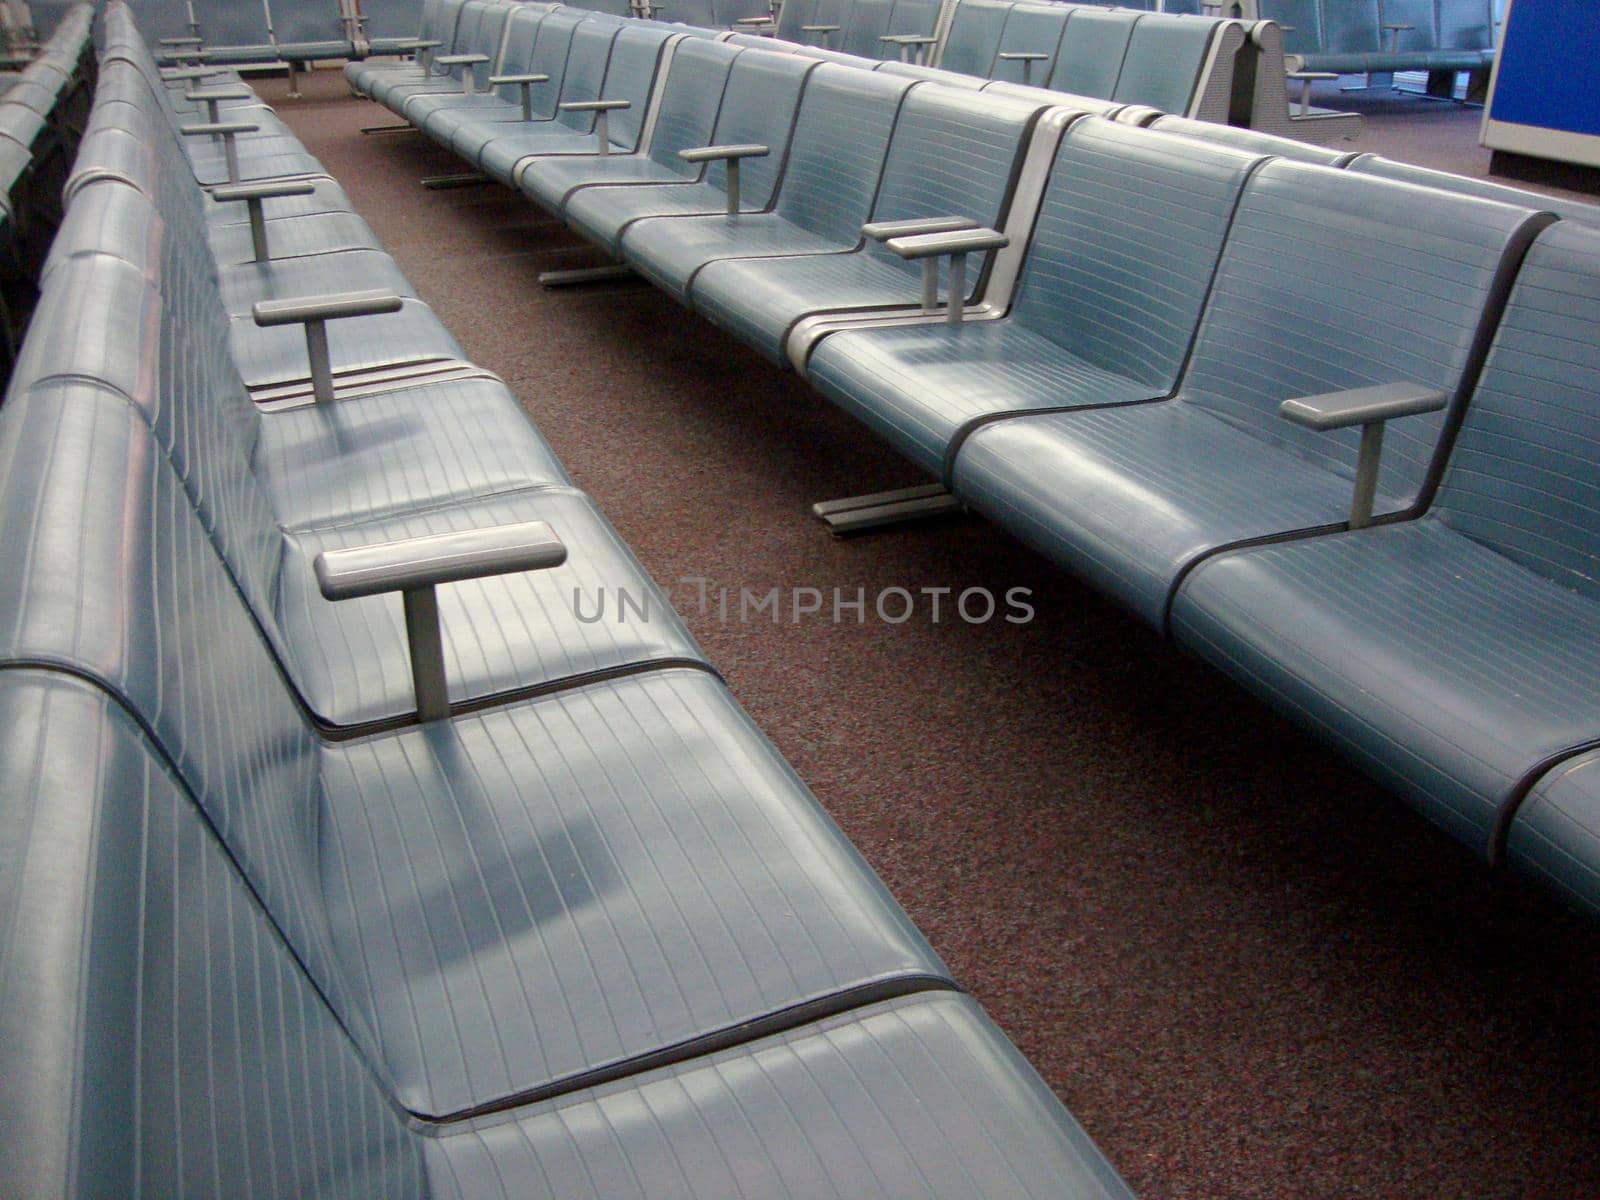 Chicago - May 25, 2010: Rows of Blue Seats at the O'hare airport in Chicago.